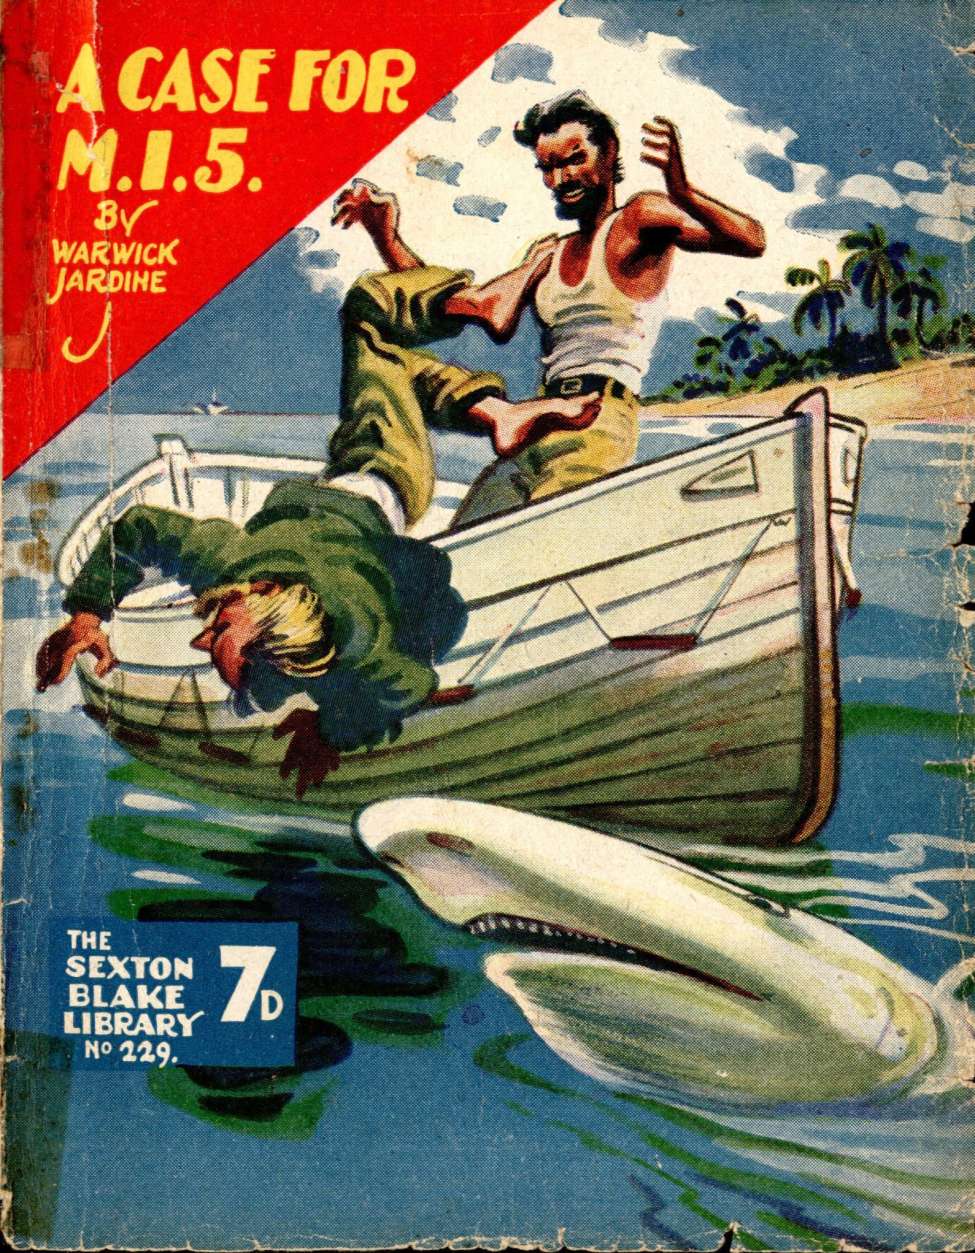 Comic Book Cover For Sexton Blake Library S3 229 - A Case for M.I.5